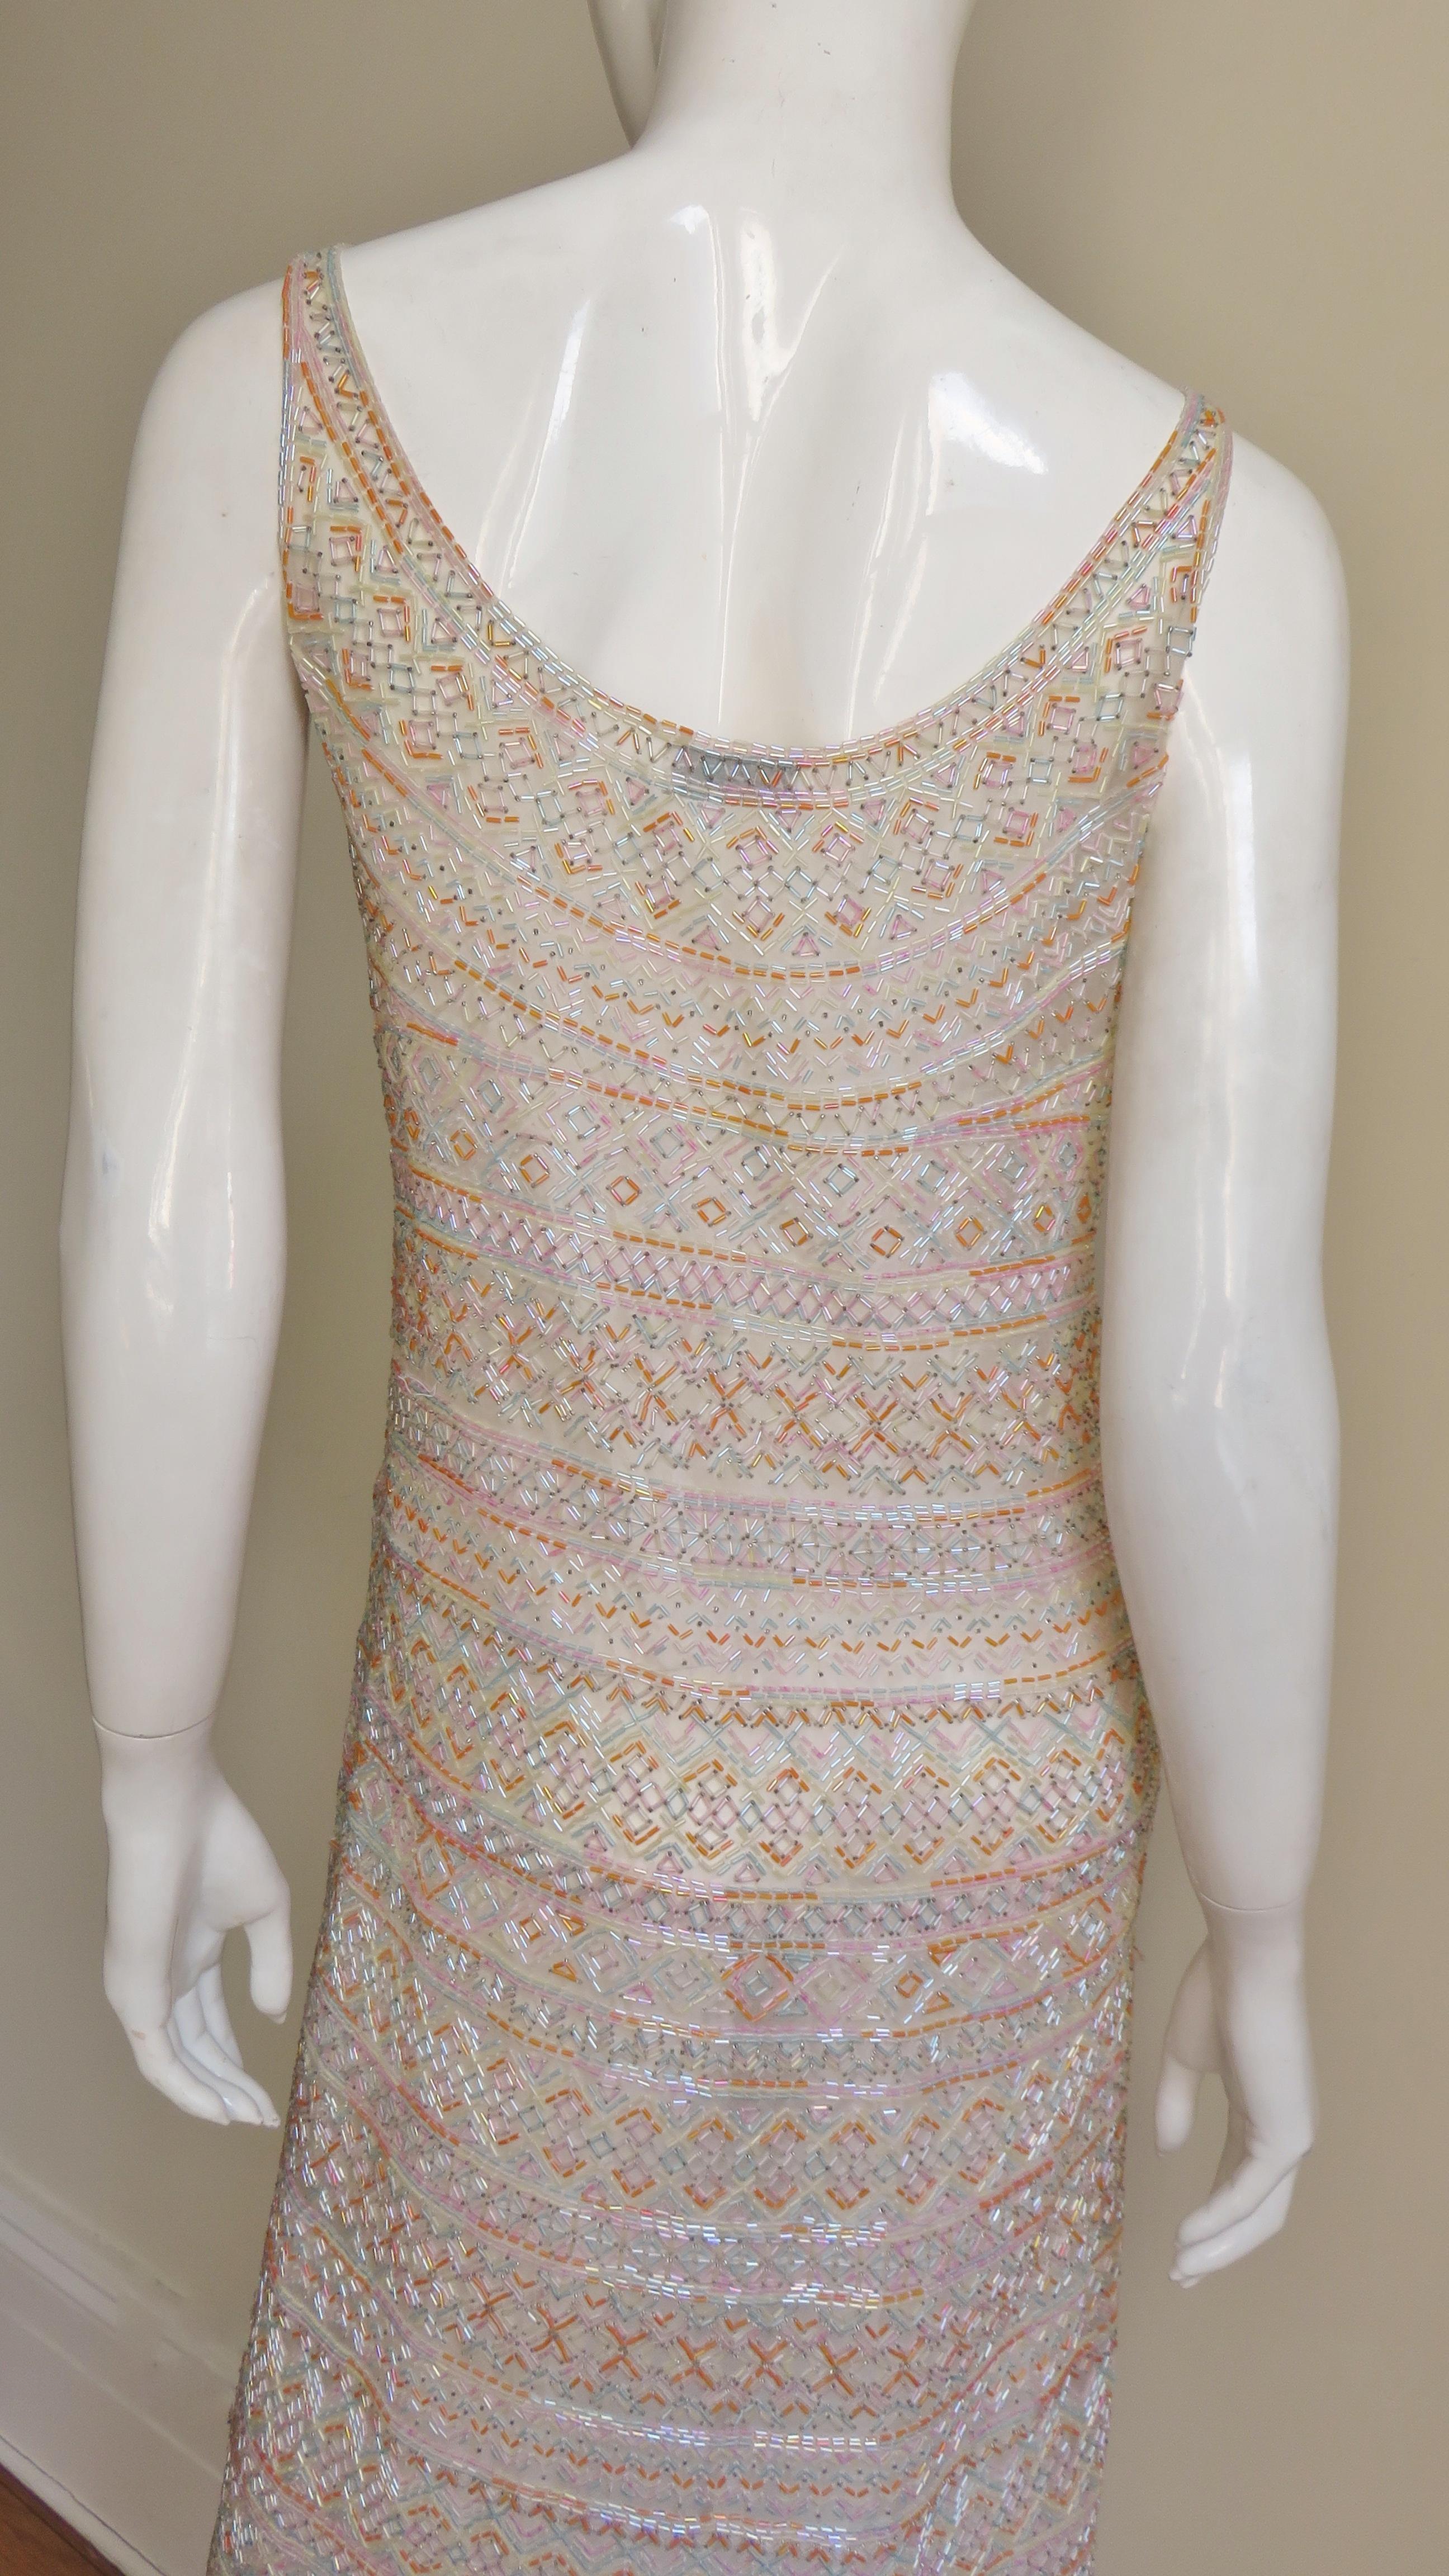  Halston 1970s Documented Beaded Dress  For Sale 4